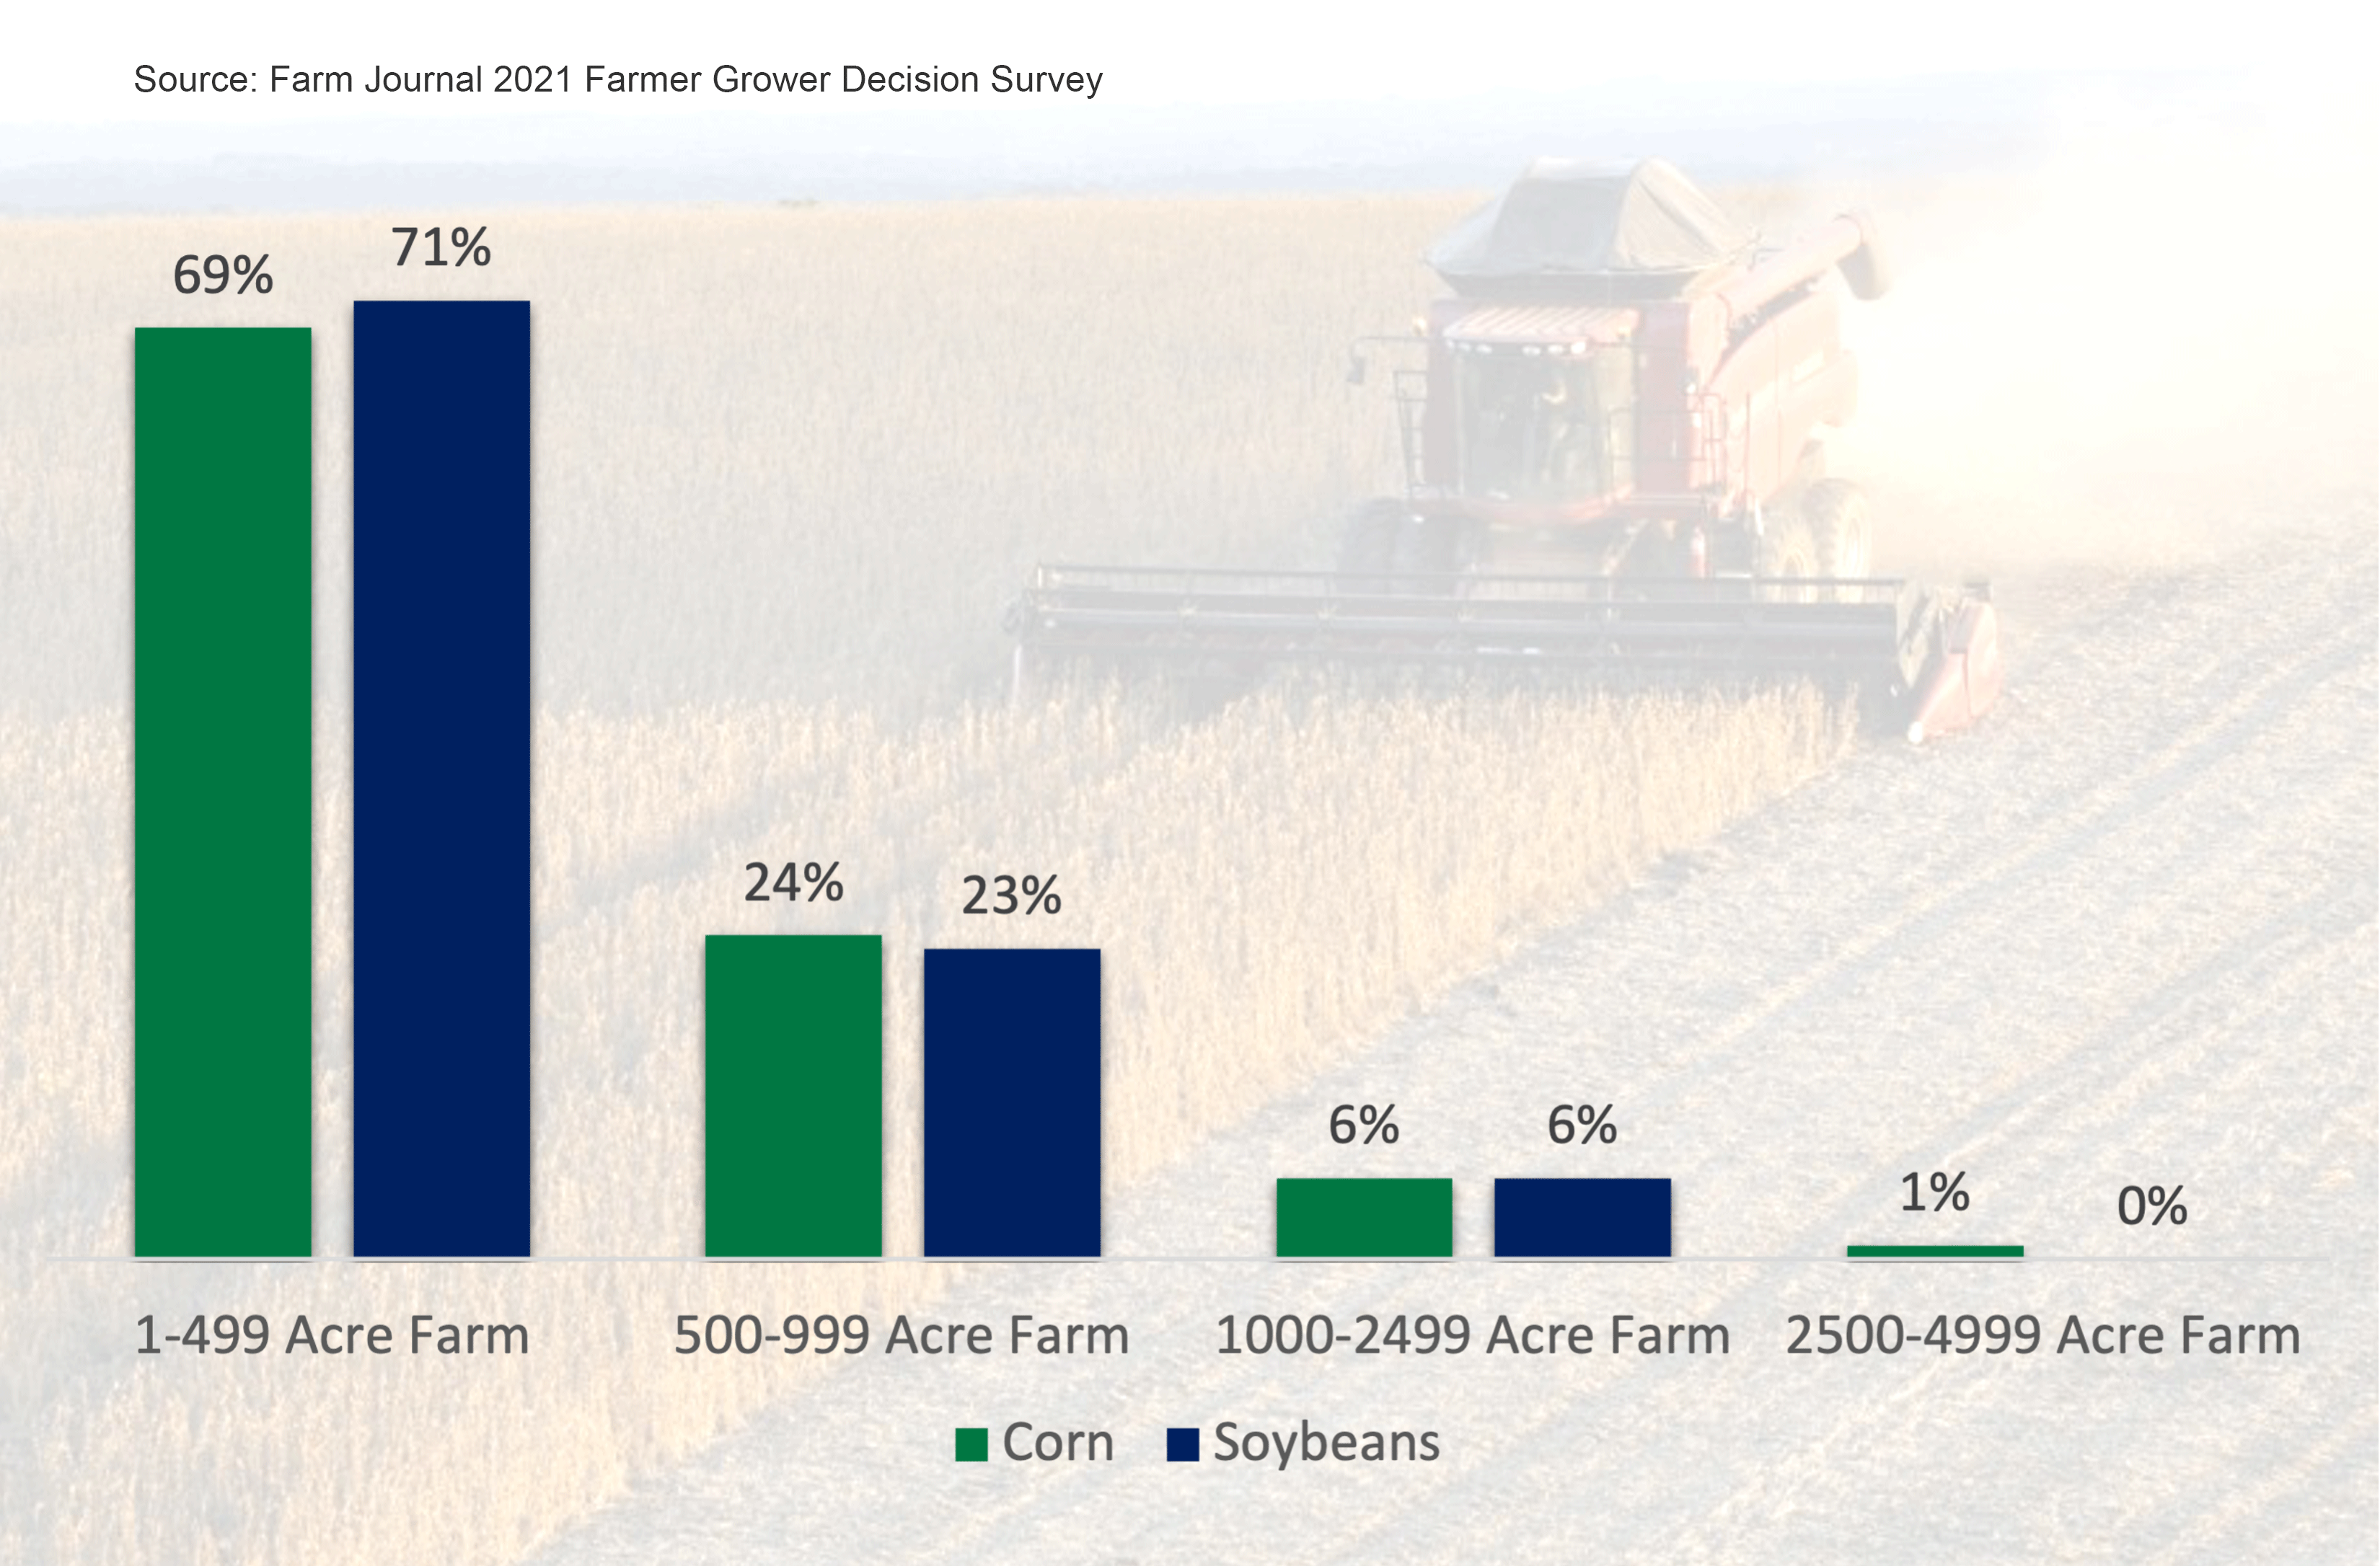 Farm Size for People Growing Corn and Soybeans